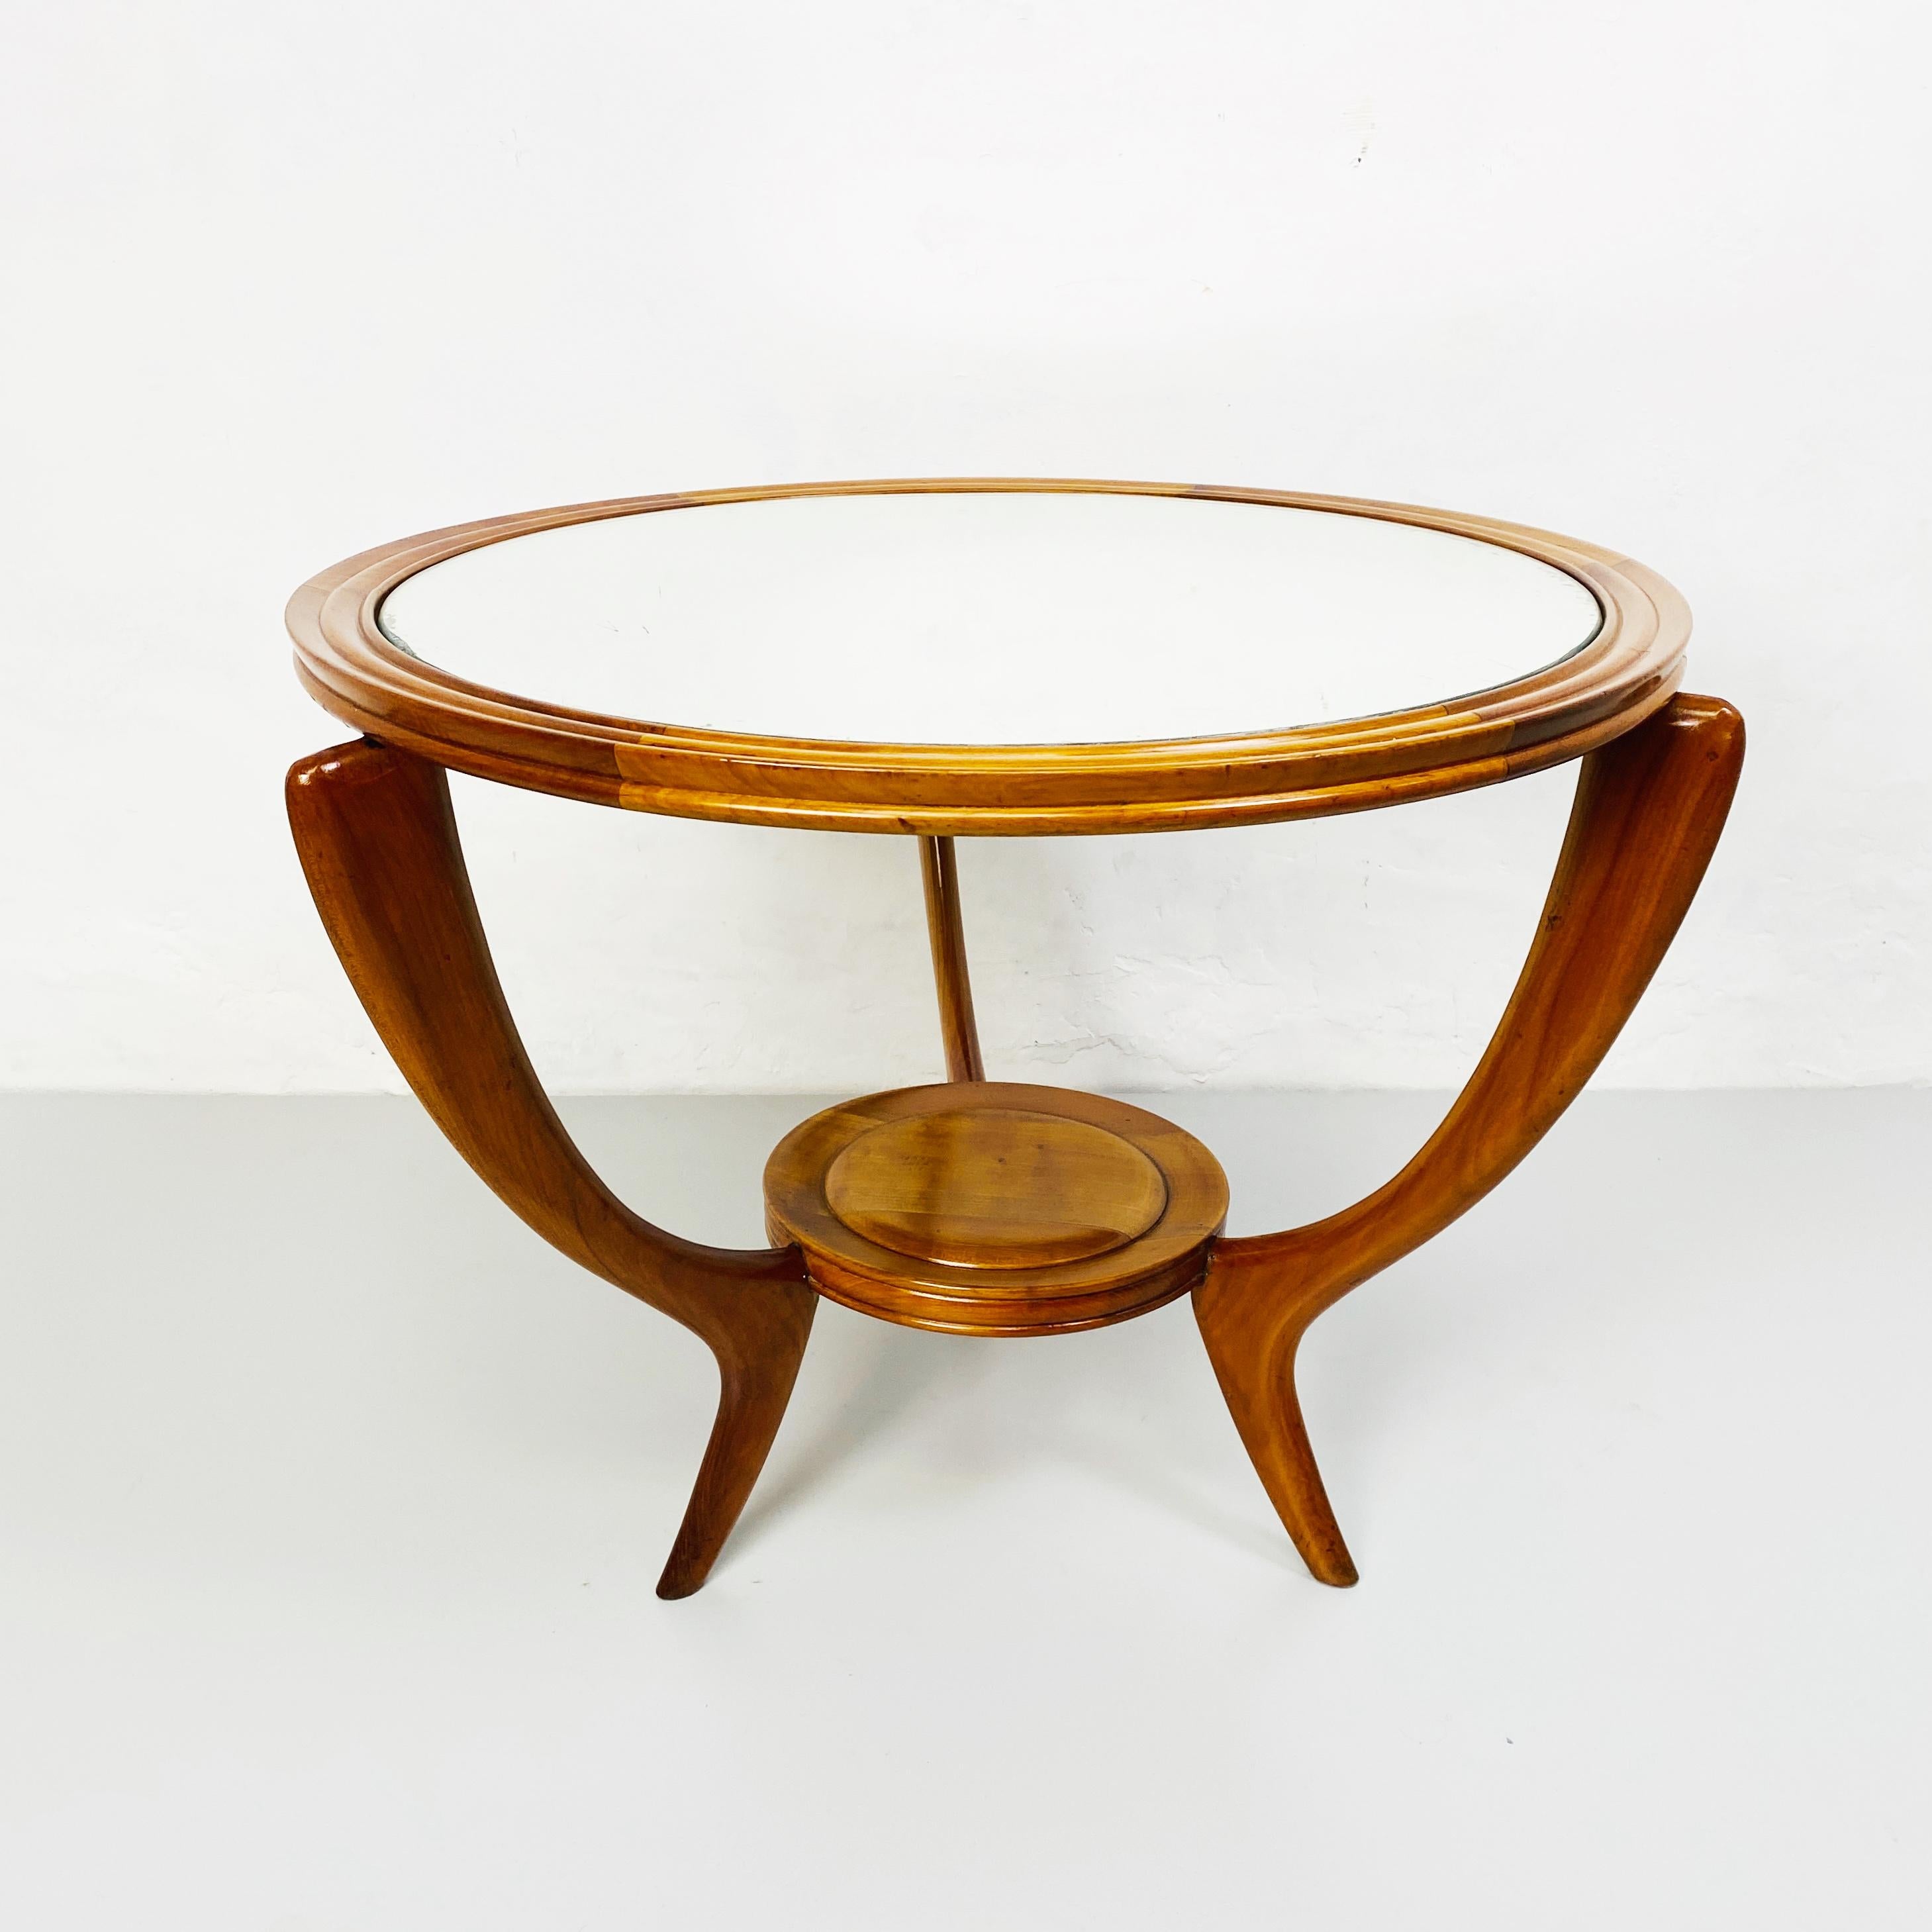 Italian Mid-Century Wood Round Table with Mirror, 1950s For Sale 4